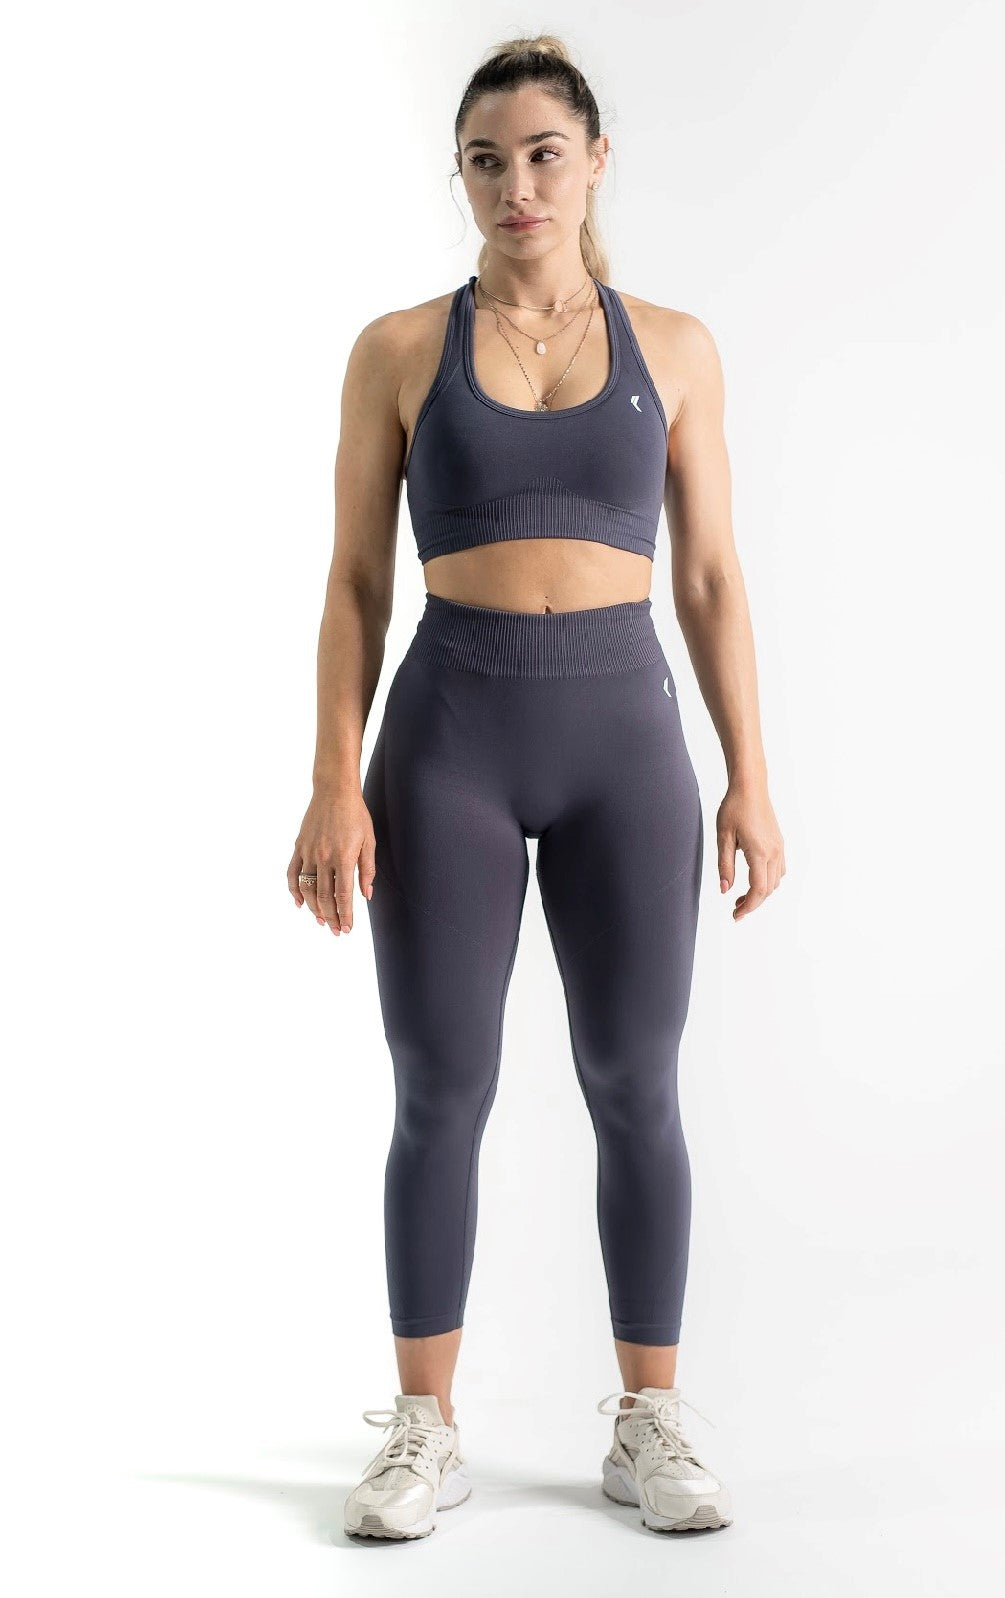 SEAMLESS 2.0 Full length tights CHARCOAL